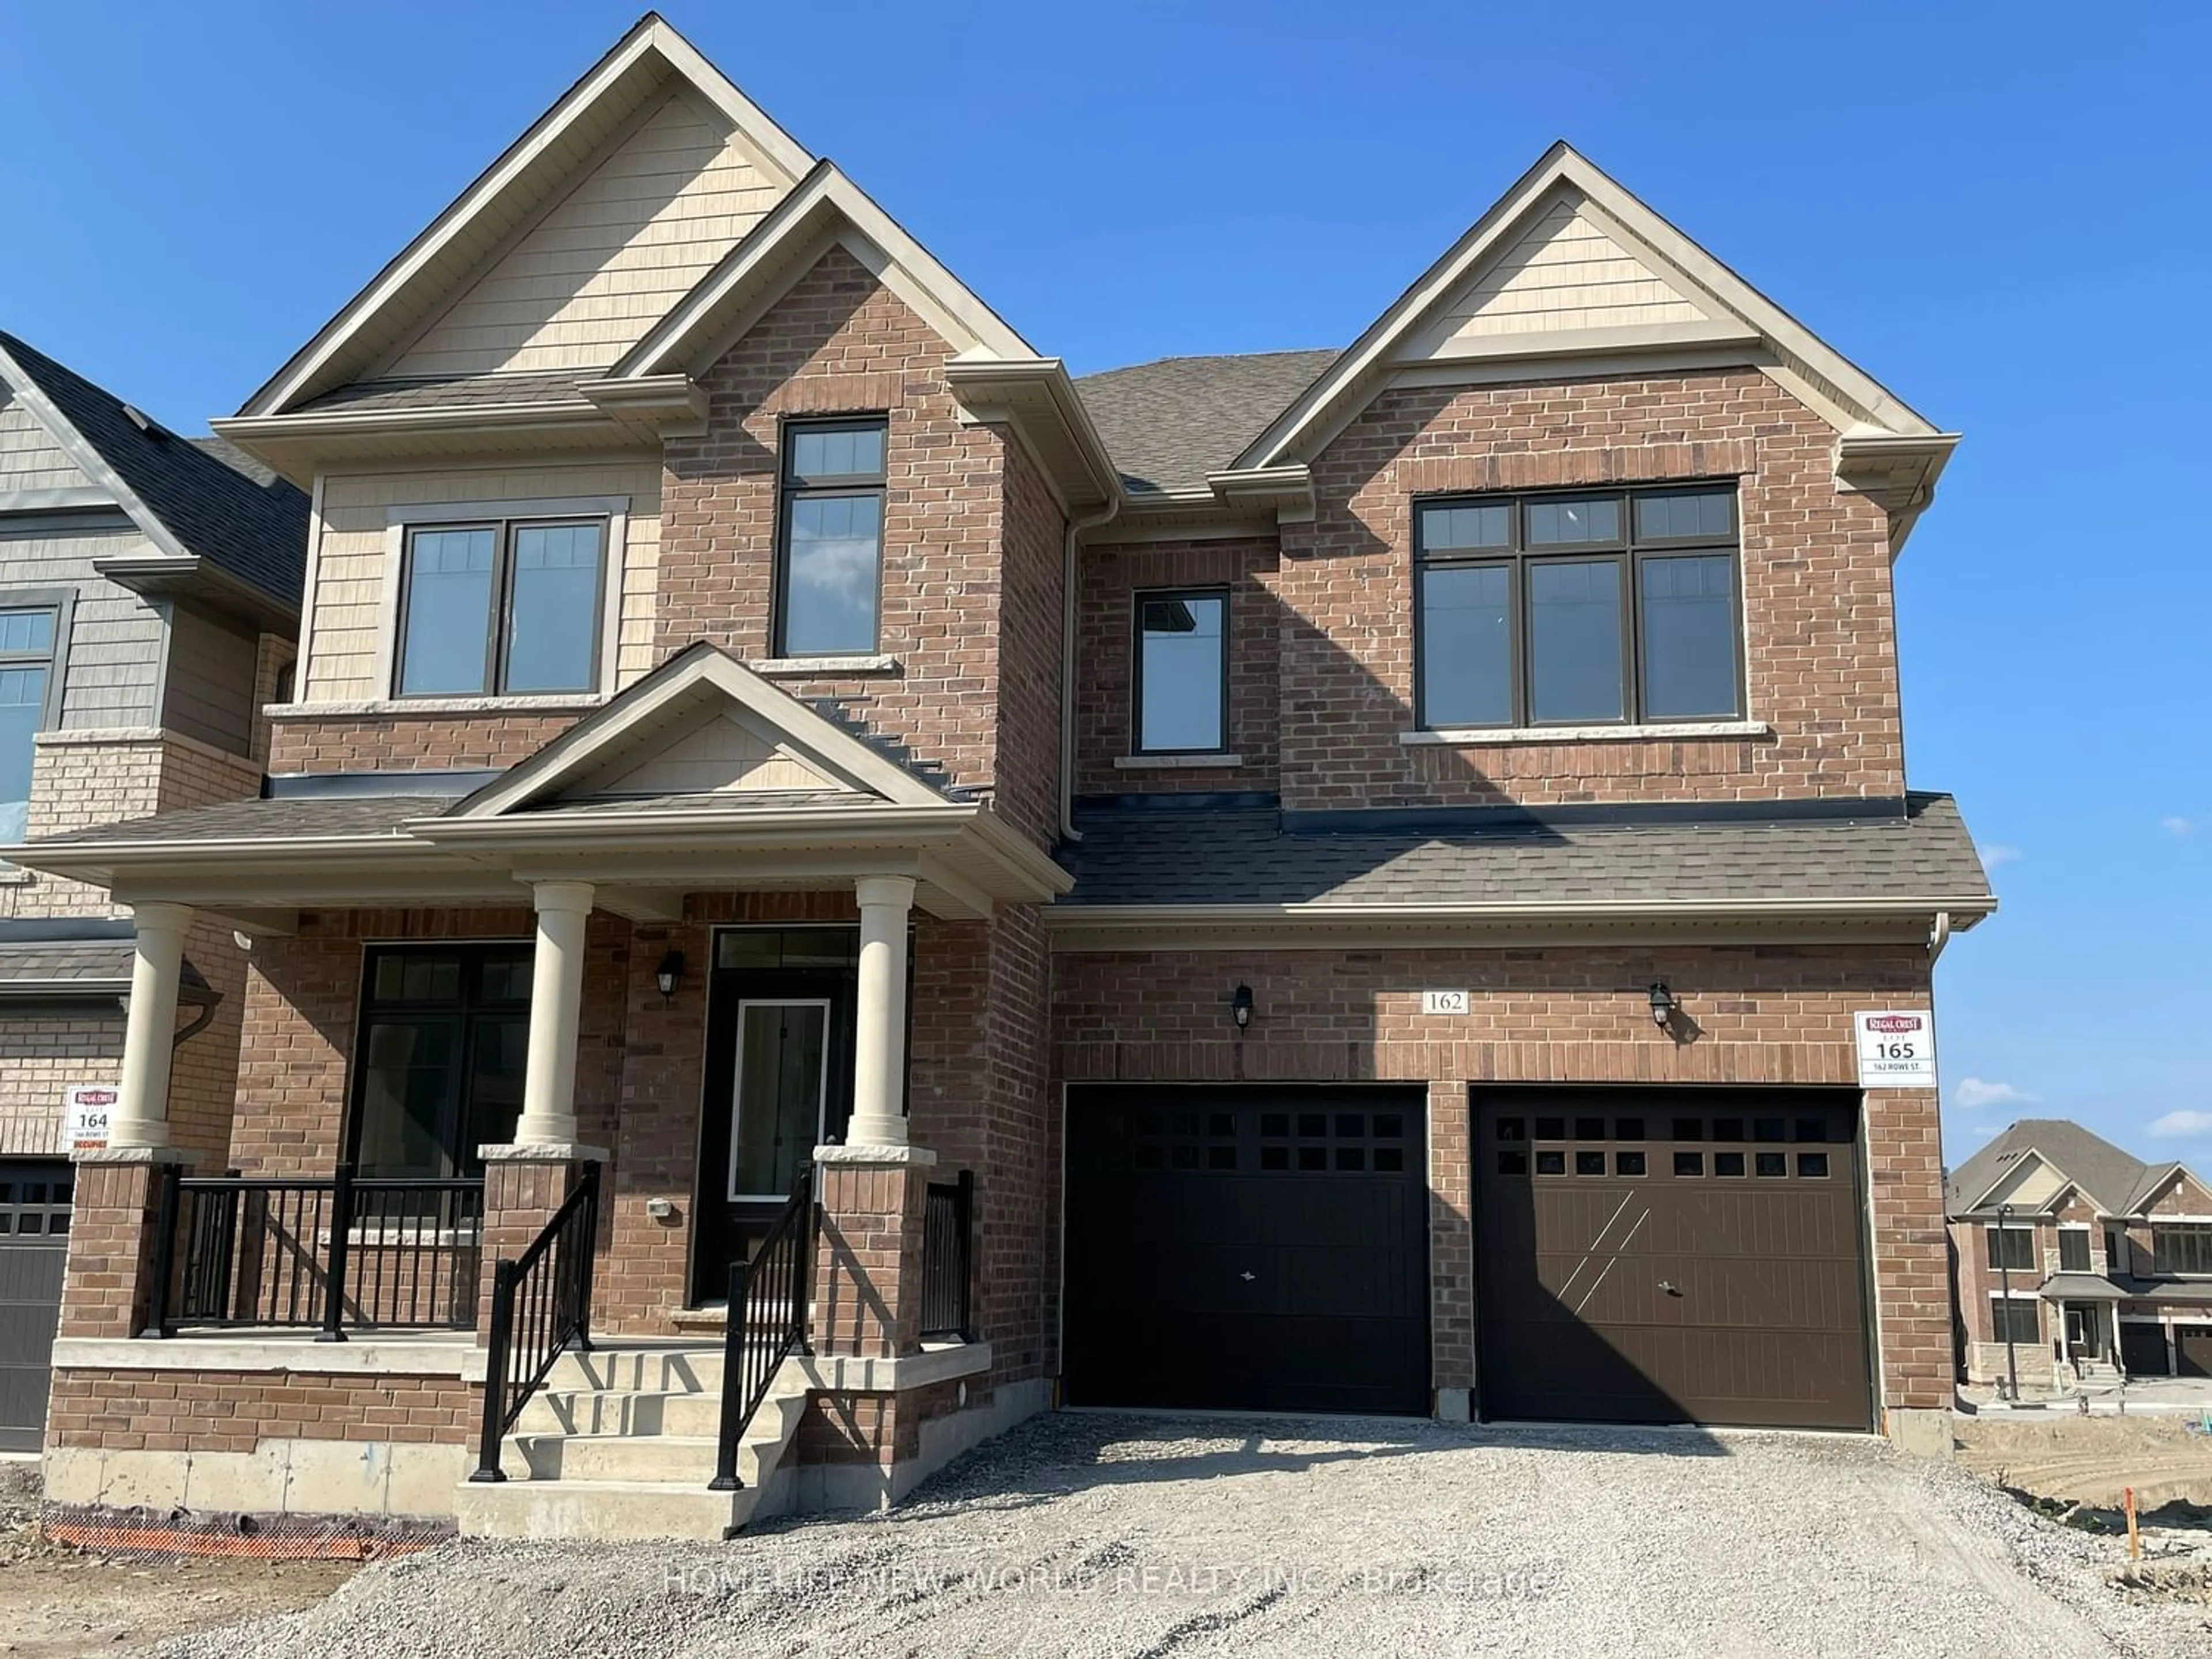 Home with brick exterior material for 162 Rowe St, Bradford West Gwillimbury Ontario L3Z 4N2